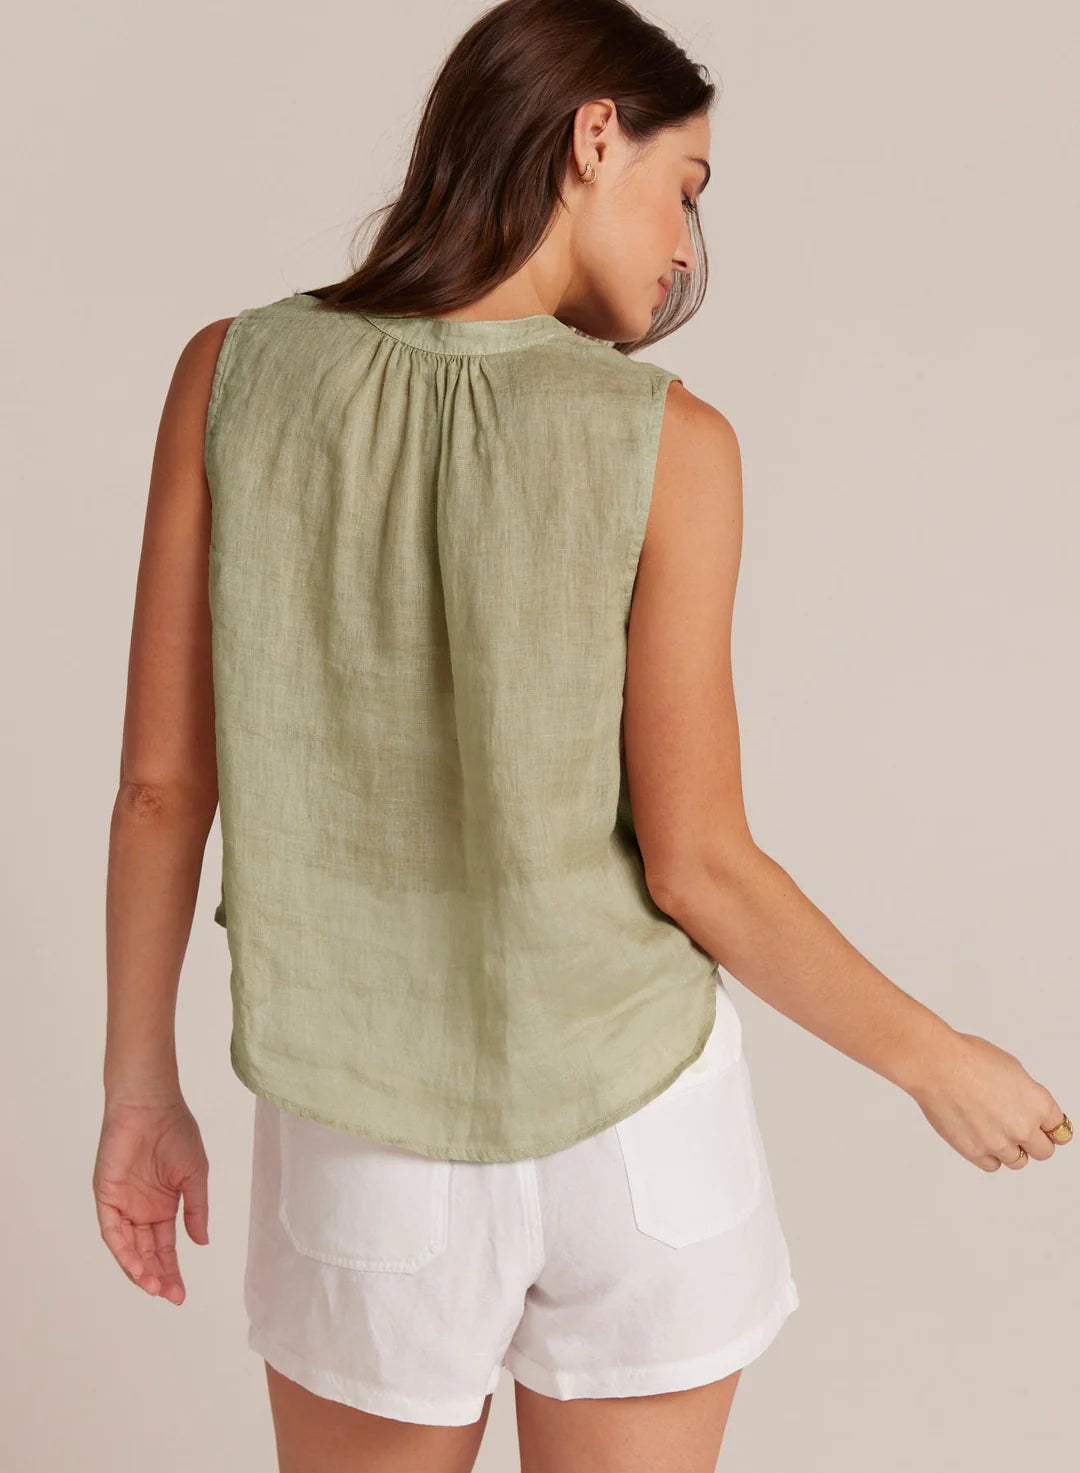 SLEEVELESS SHIRRED SHOULDER BLOUSE IN PALE PALM - Romi Boutique